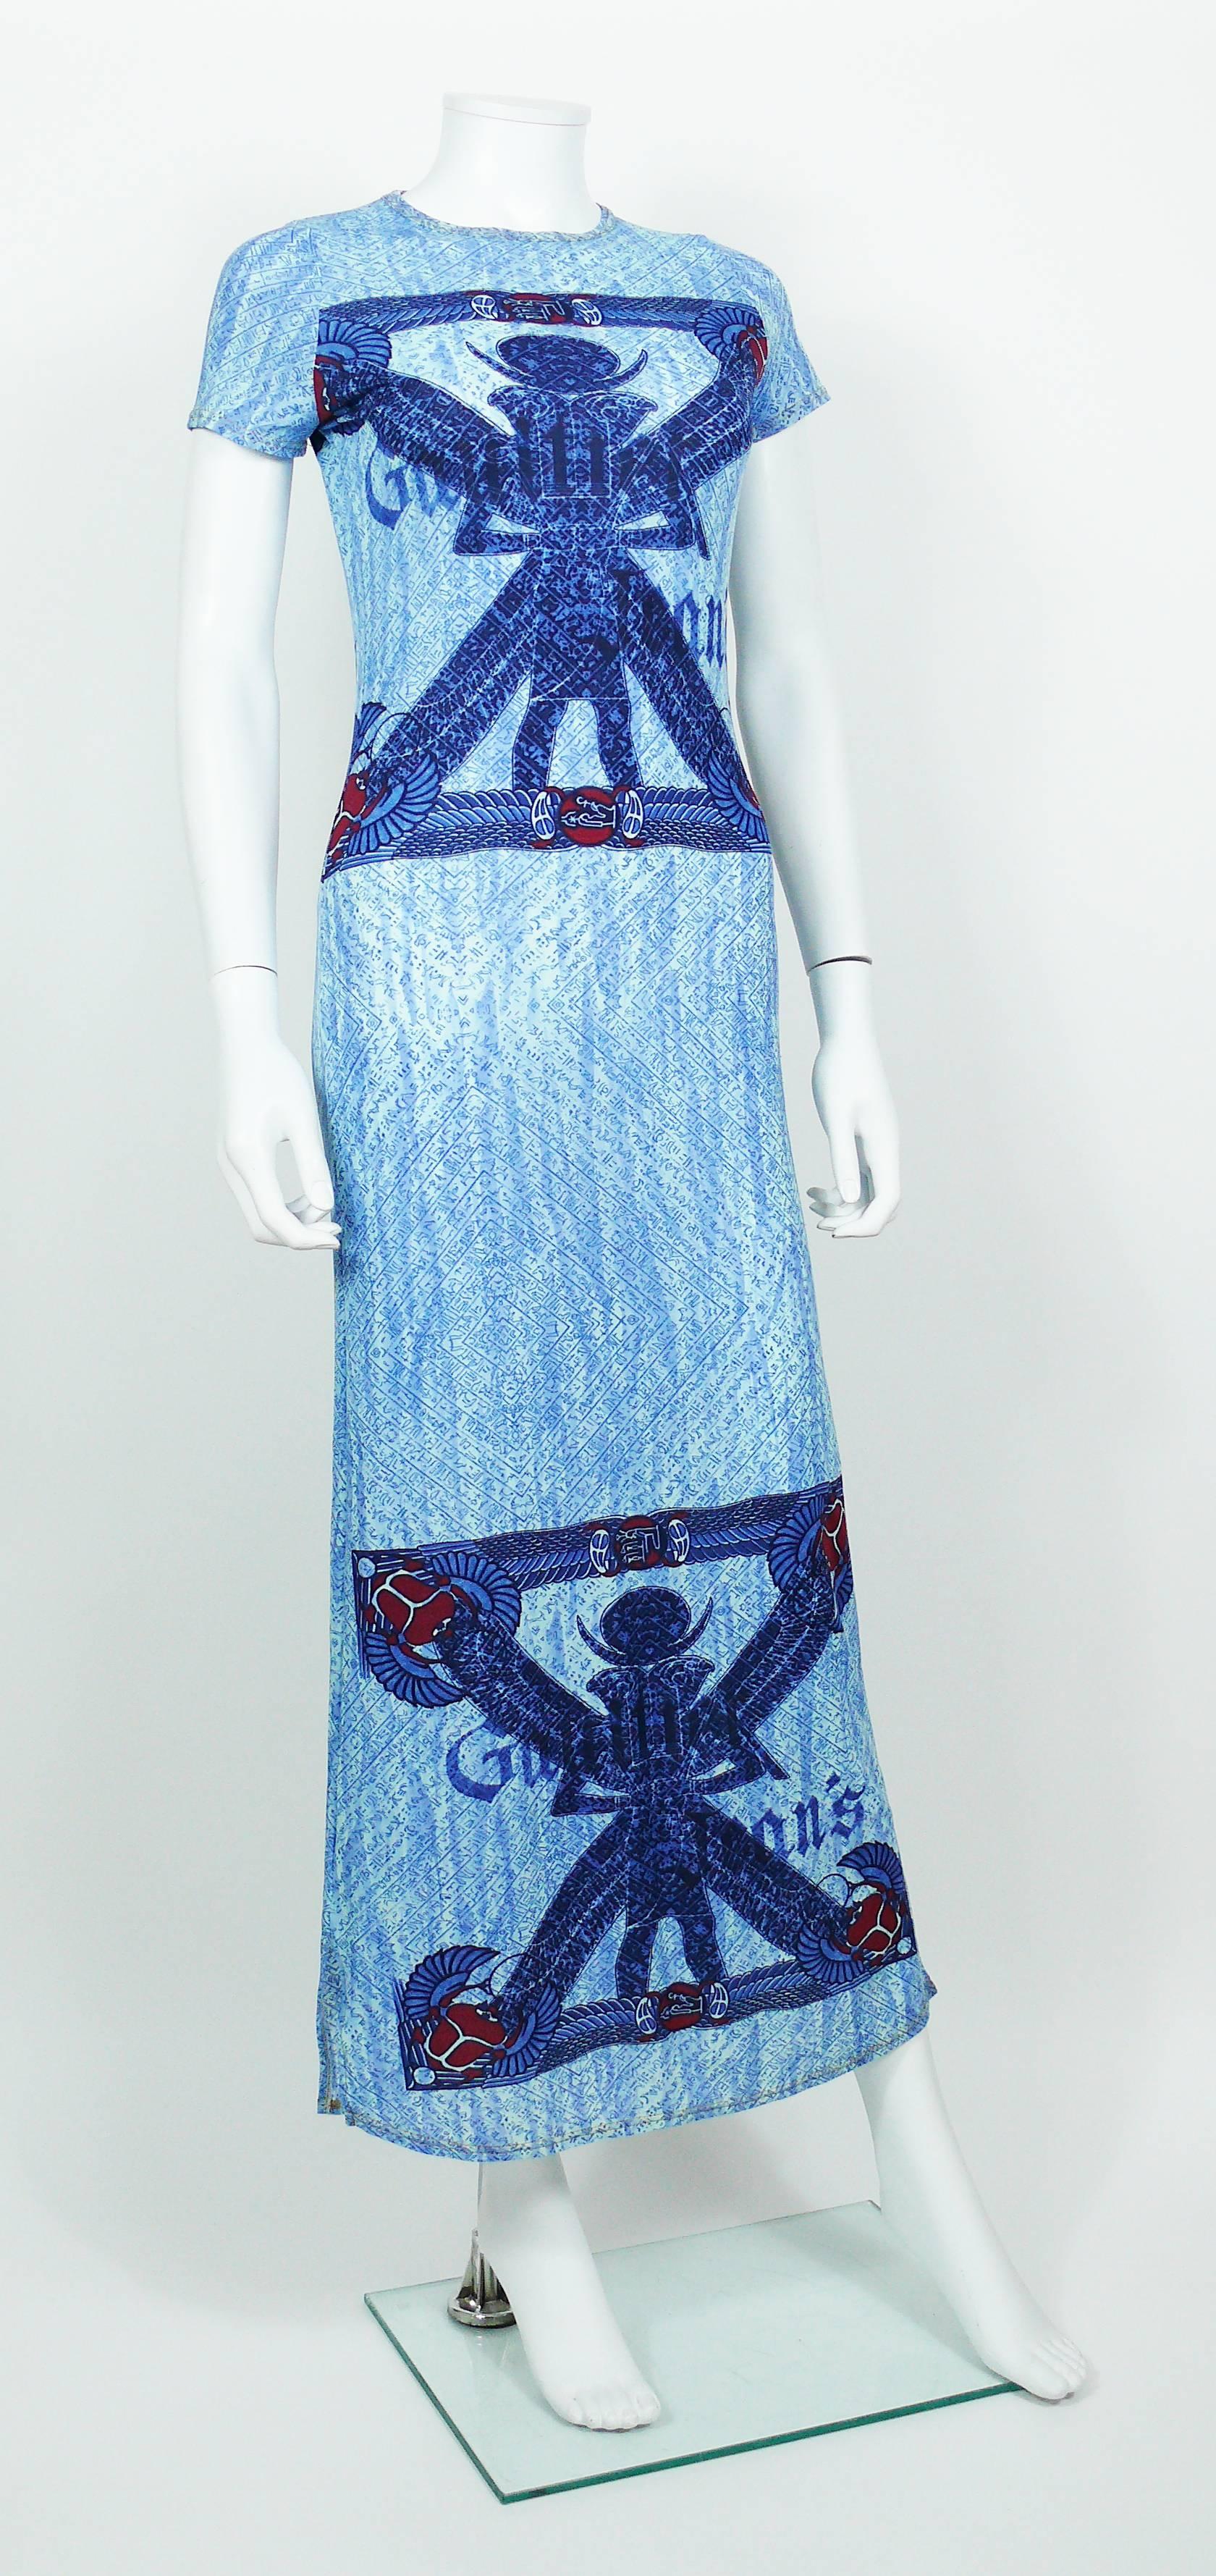 JEAN PAUL GAULTIER vintage blue maxi dress featuring Egyptian hieroglyphs and scarab motifs printed throughout.

This dress features :
- Stretchy material.
- Round collar.
- Cap sleeves.
- Slits on both sides.

Label reads GAULTIER JEAN'S.

Size tag